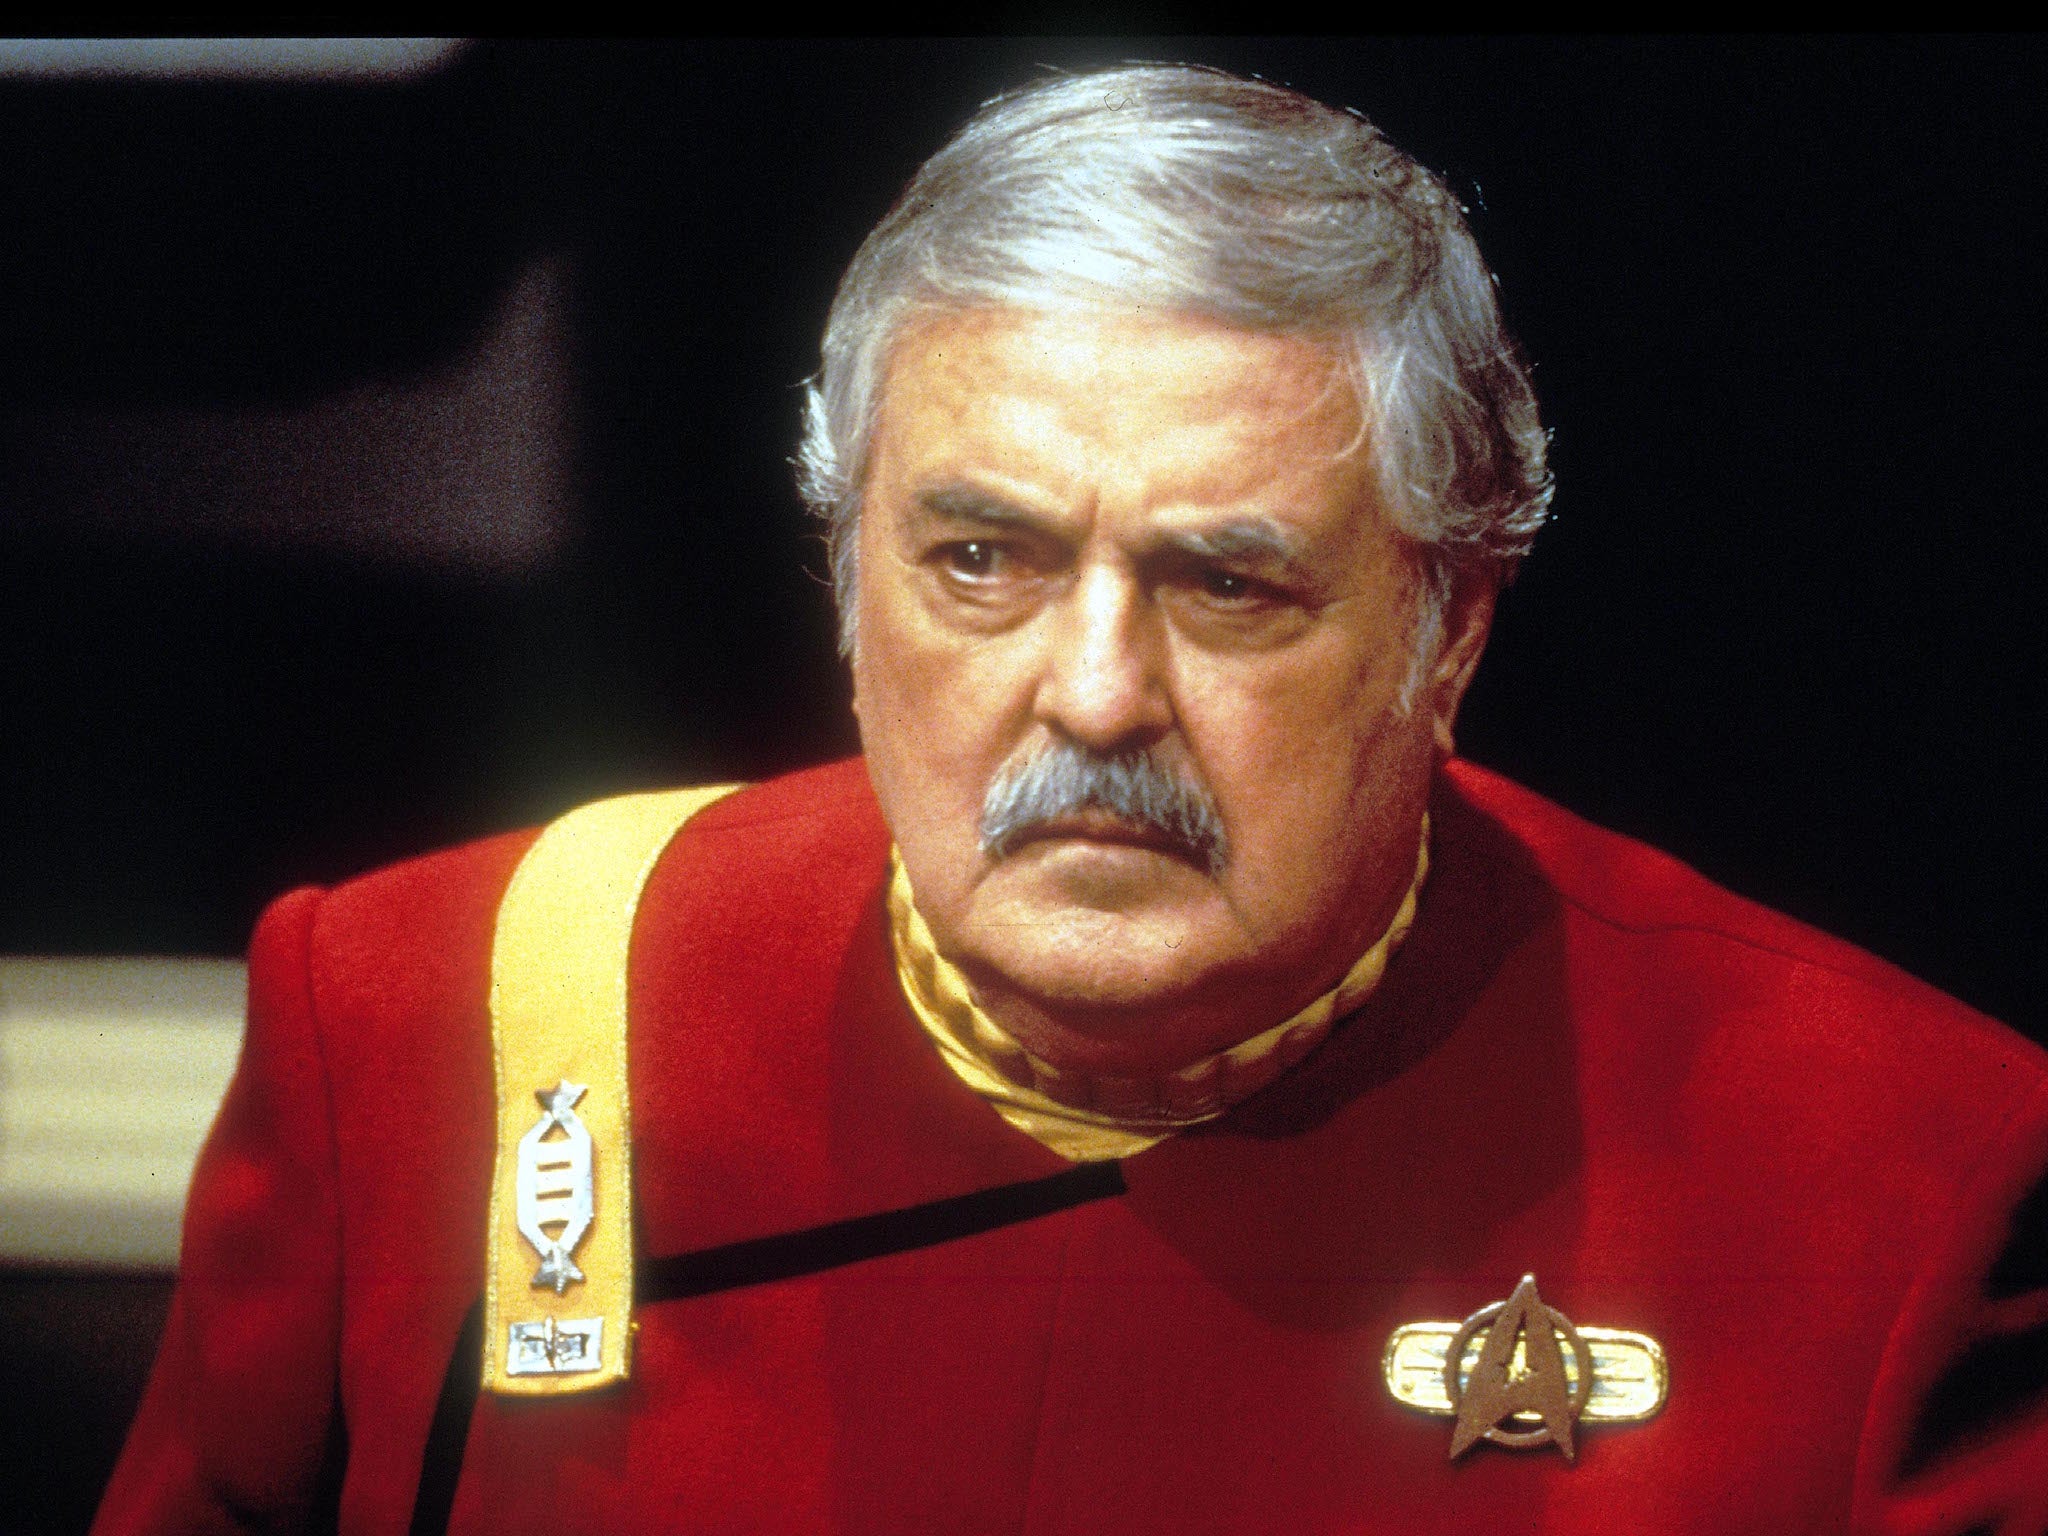 Ashes of Star Trek ‘Scotty’ actor James Doohan smuggled aboard the International Space Station: ‘He always wanted to go to space’